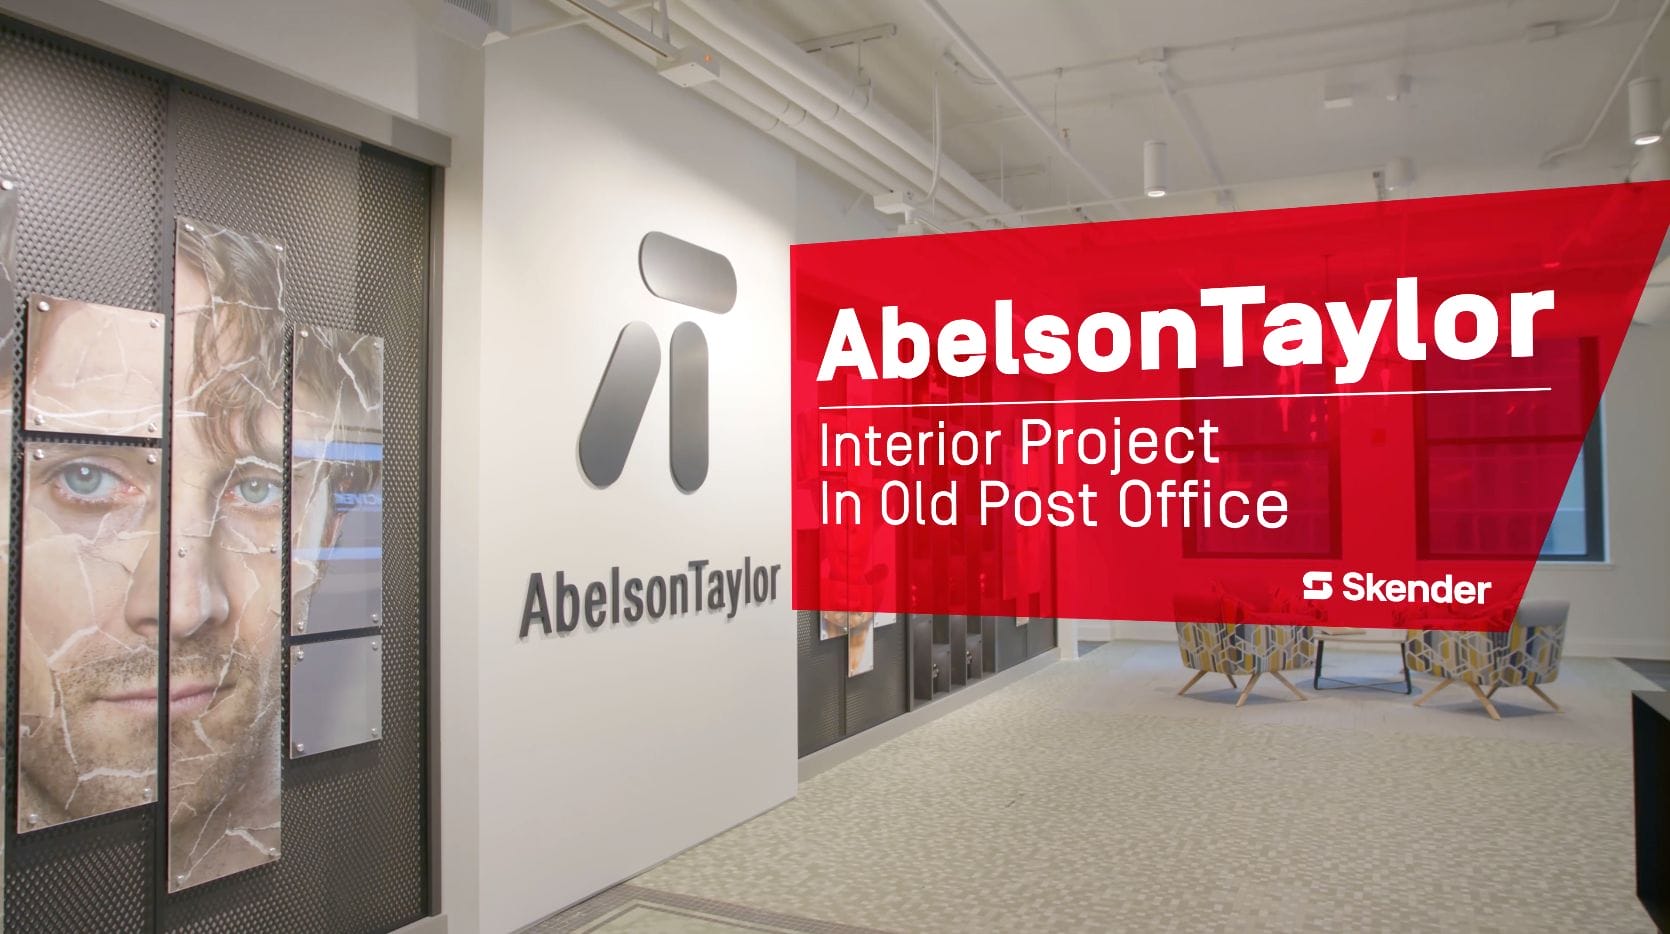 AbelsonTaylor Interior Project